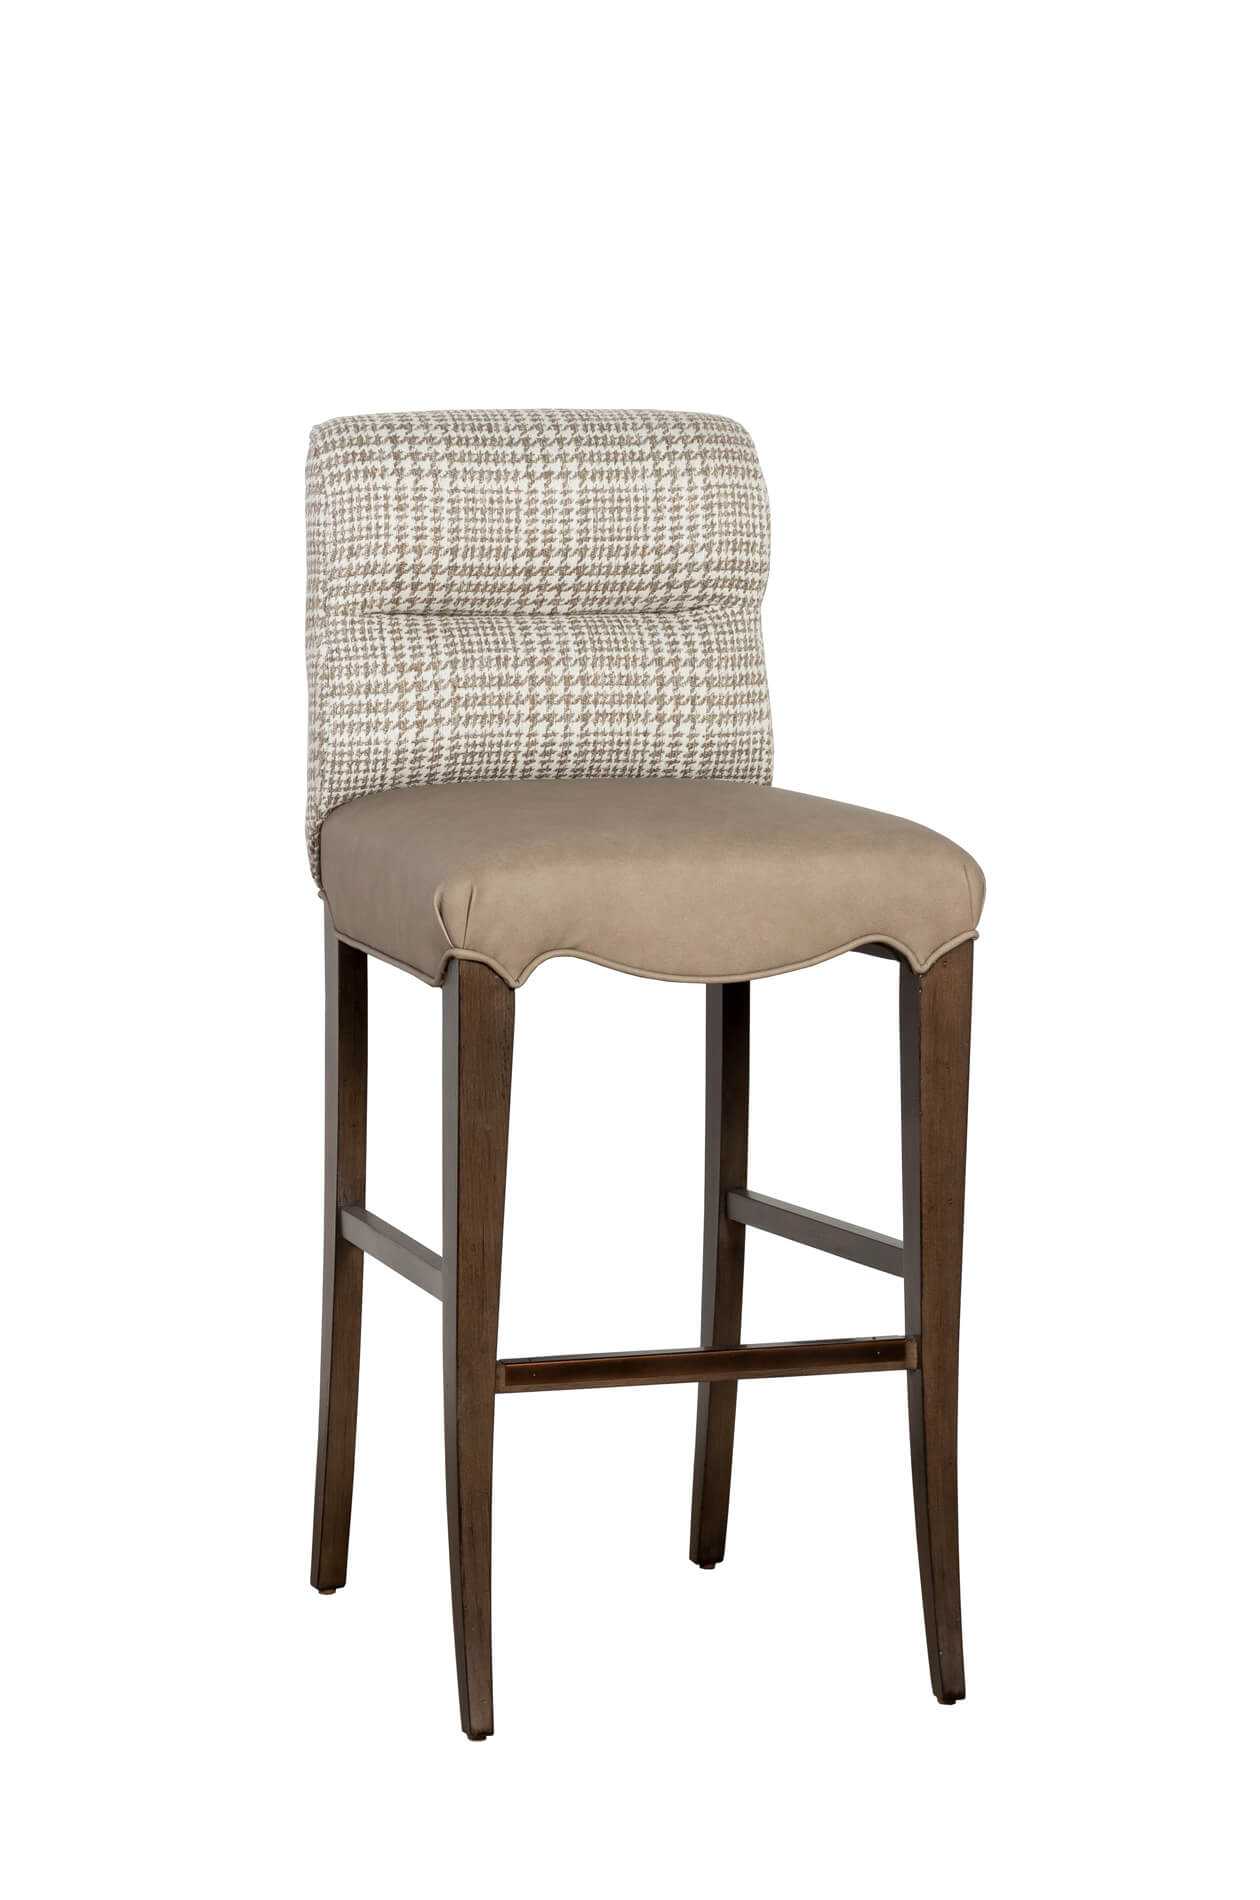 Fairfield's Magnolia Multi Wood Bar Stool with Back Fabric and Leather Seat